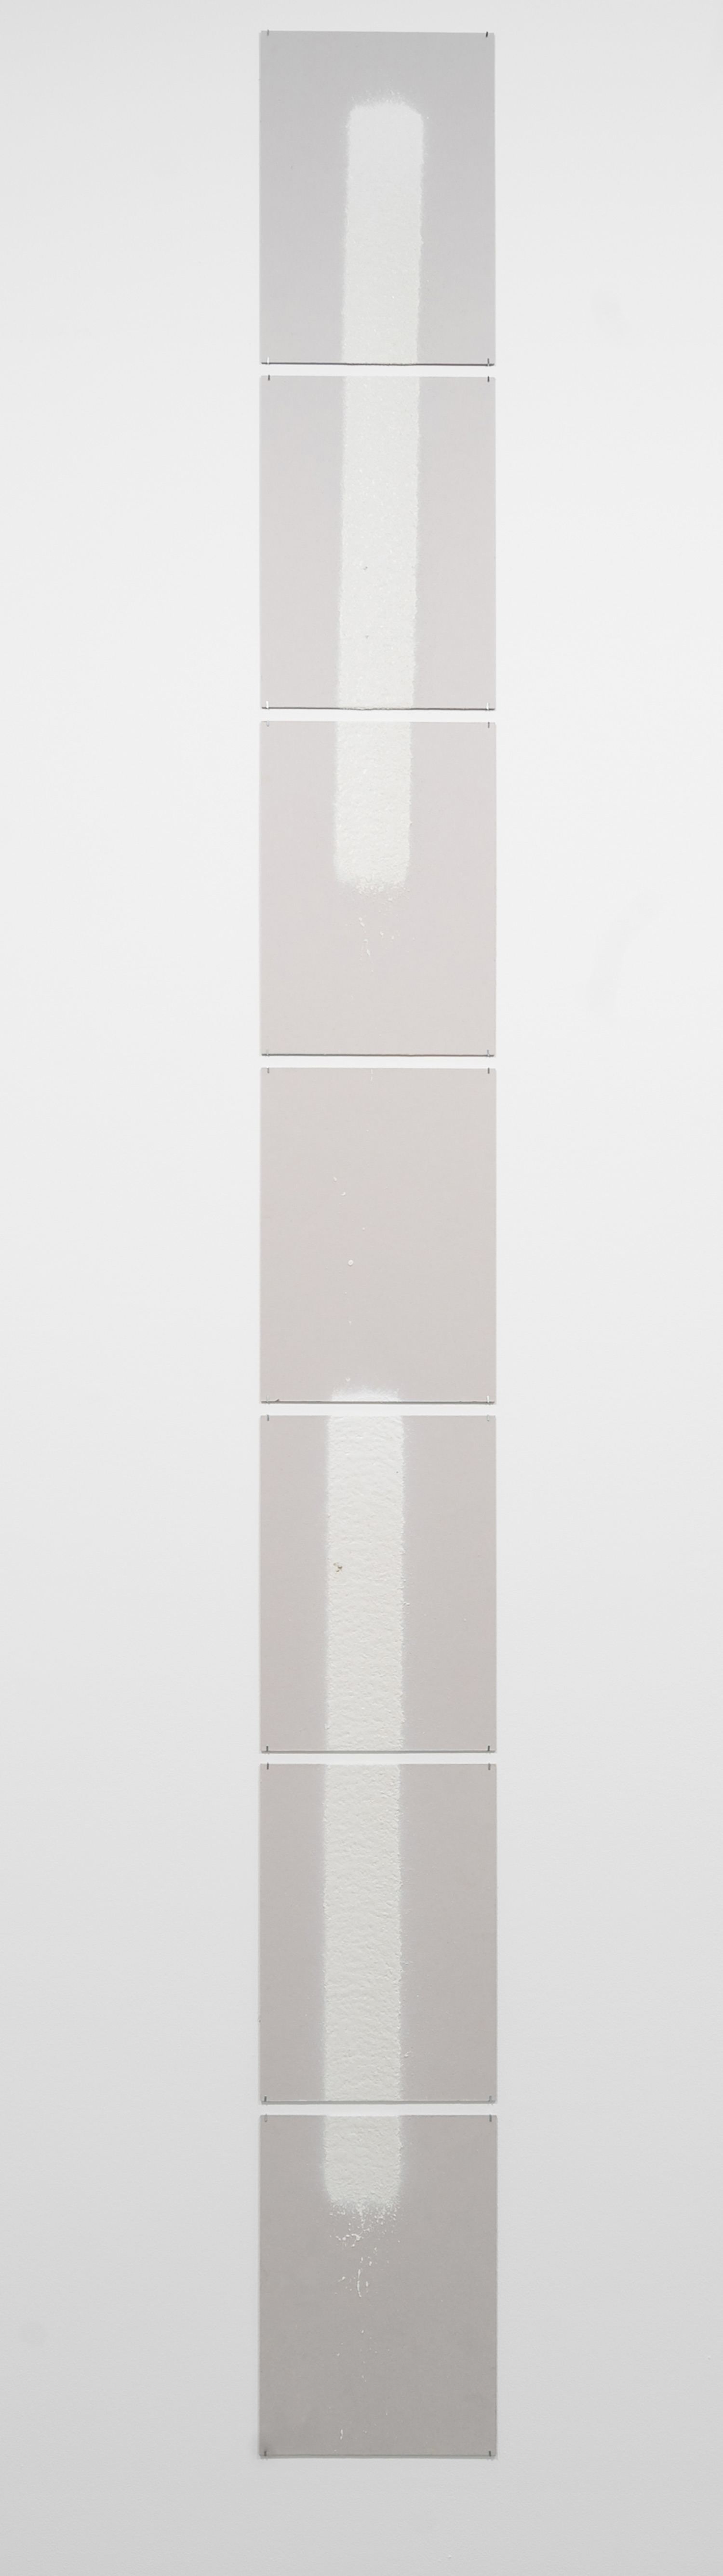   100mm (W), 1.2mm (T), White, Parking Envelope Line (620), 1000mm (L), Al Barsha 1, St 38b, LP 161,  2017  Set of 7 works  Thermoplastic paint and reflective glass particles on grey boards  50 x 35 cm each 